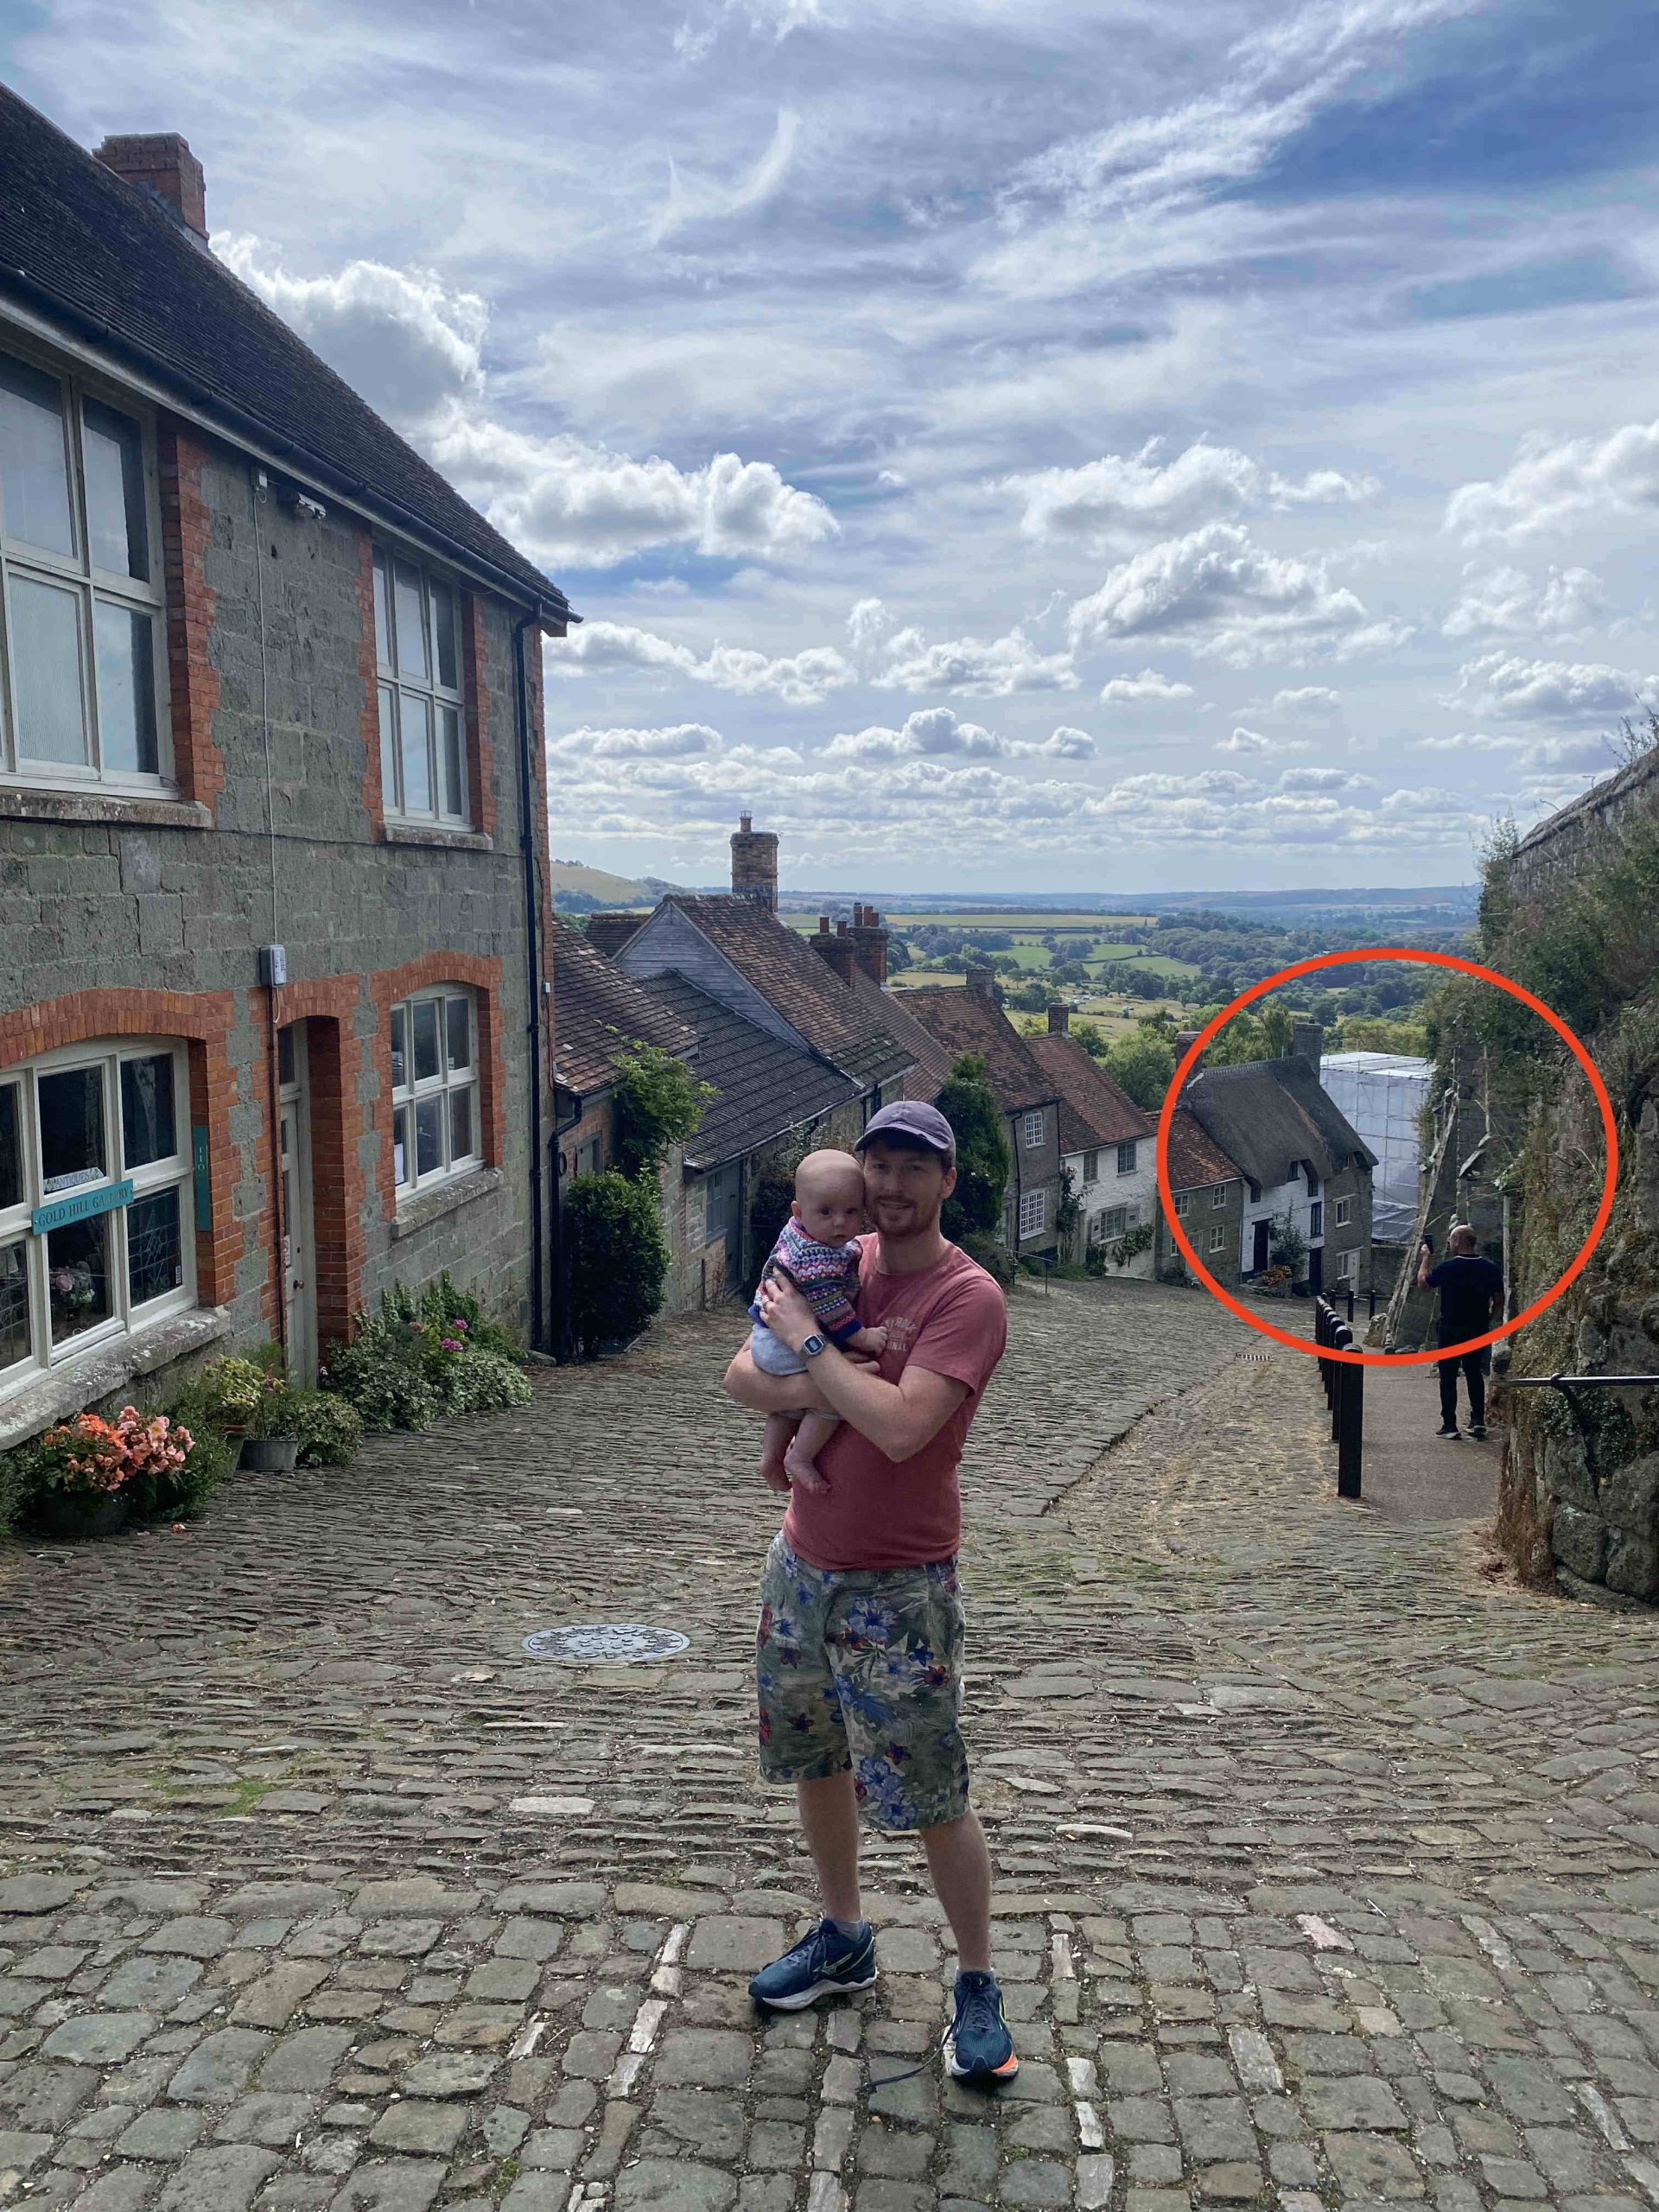 Famous View from Hovis advert ruined by scaffolding